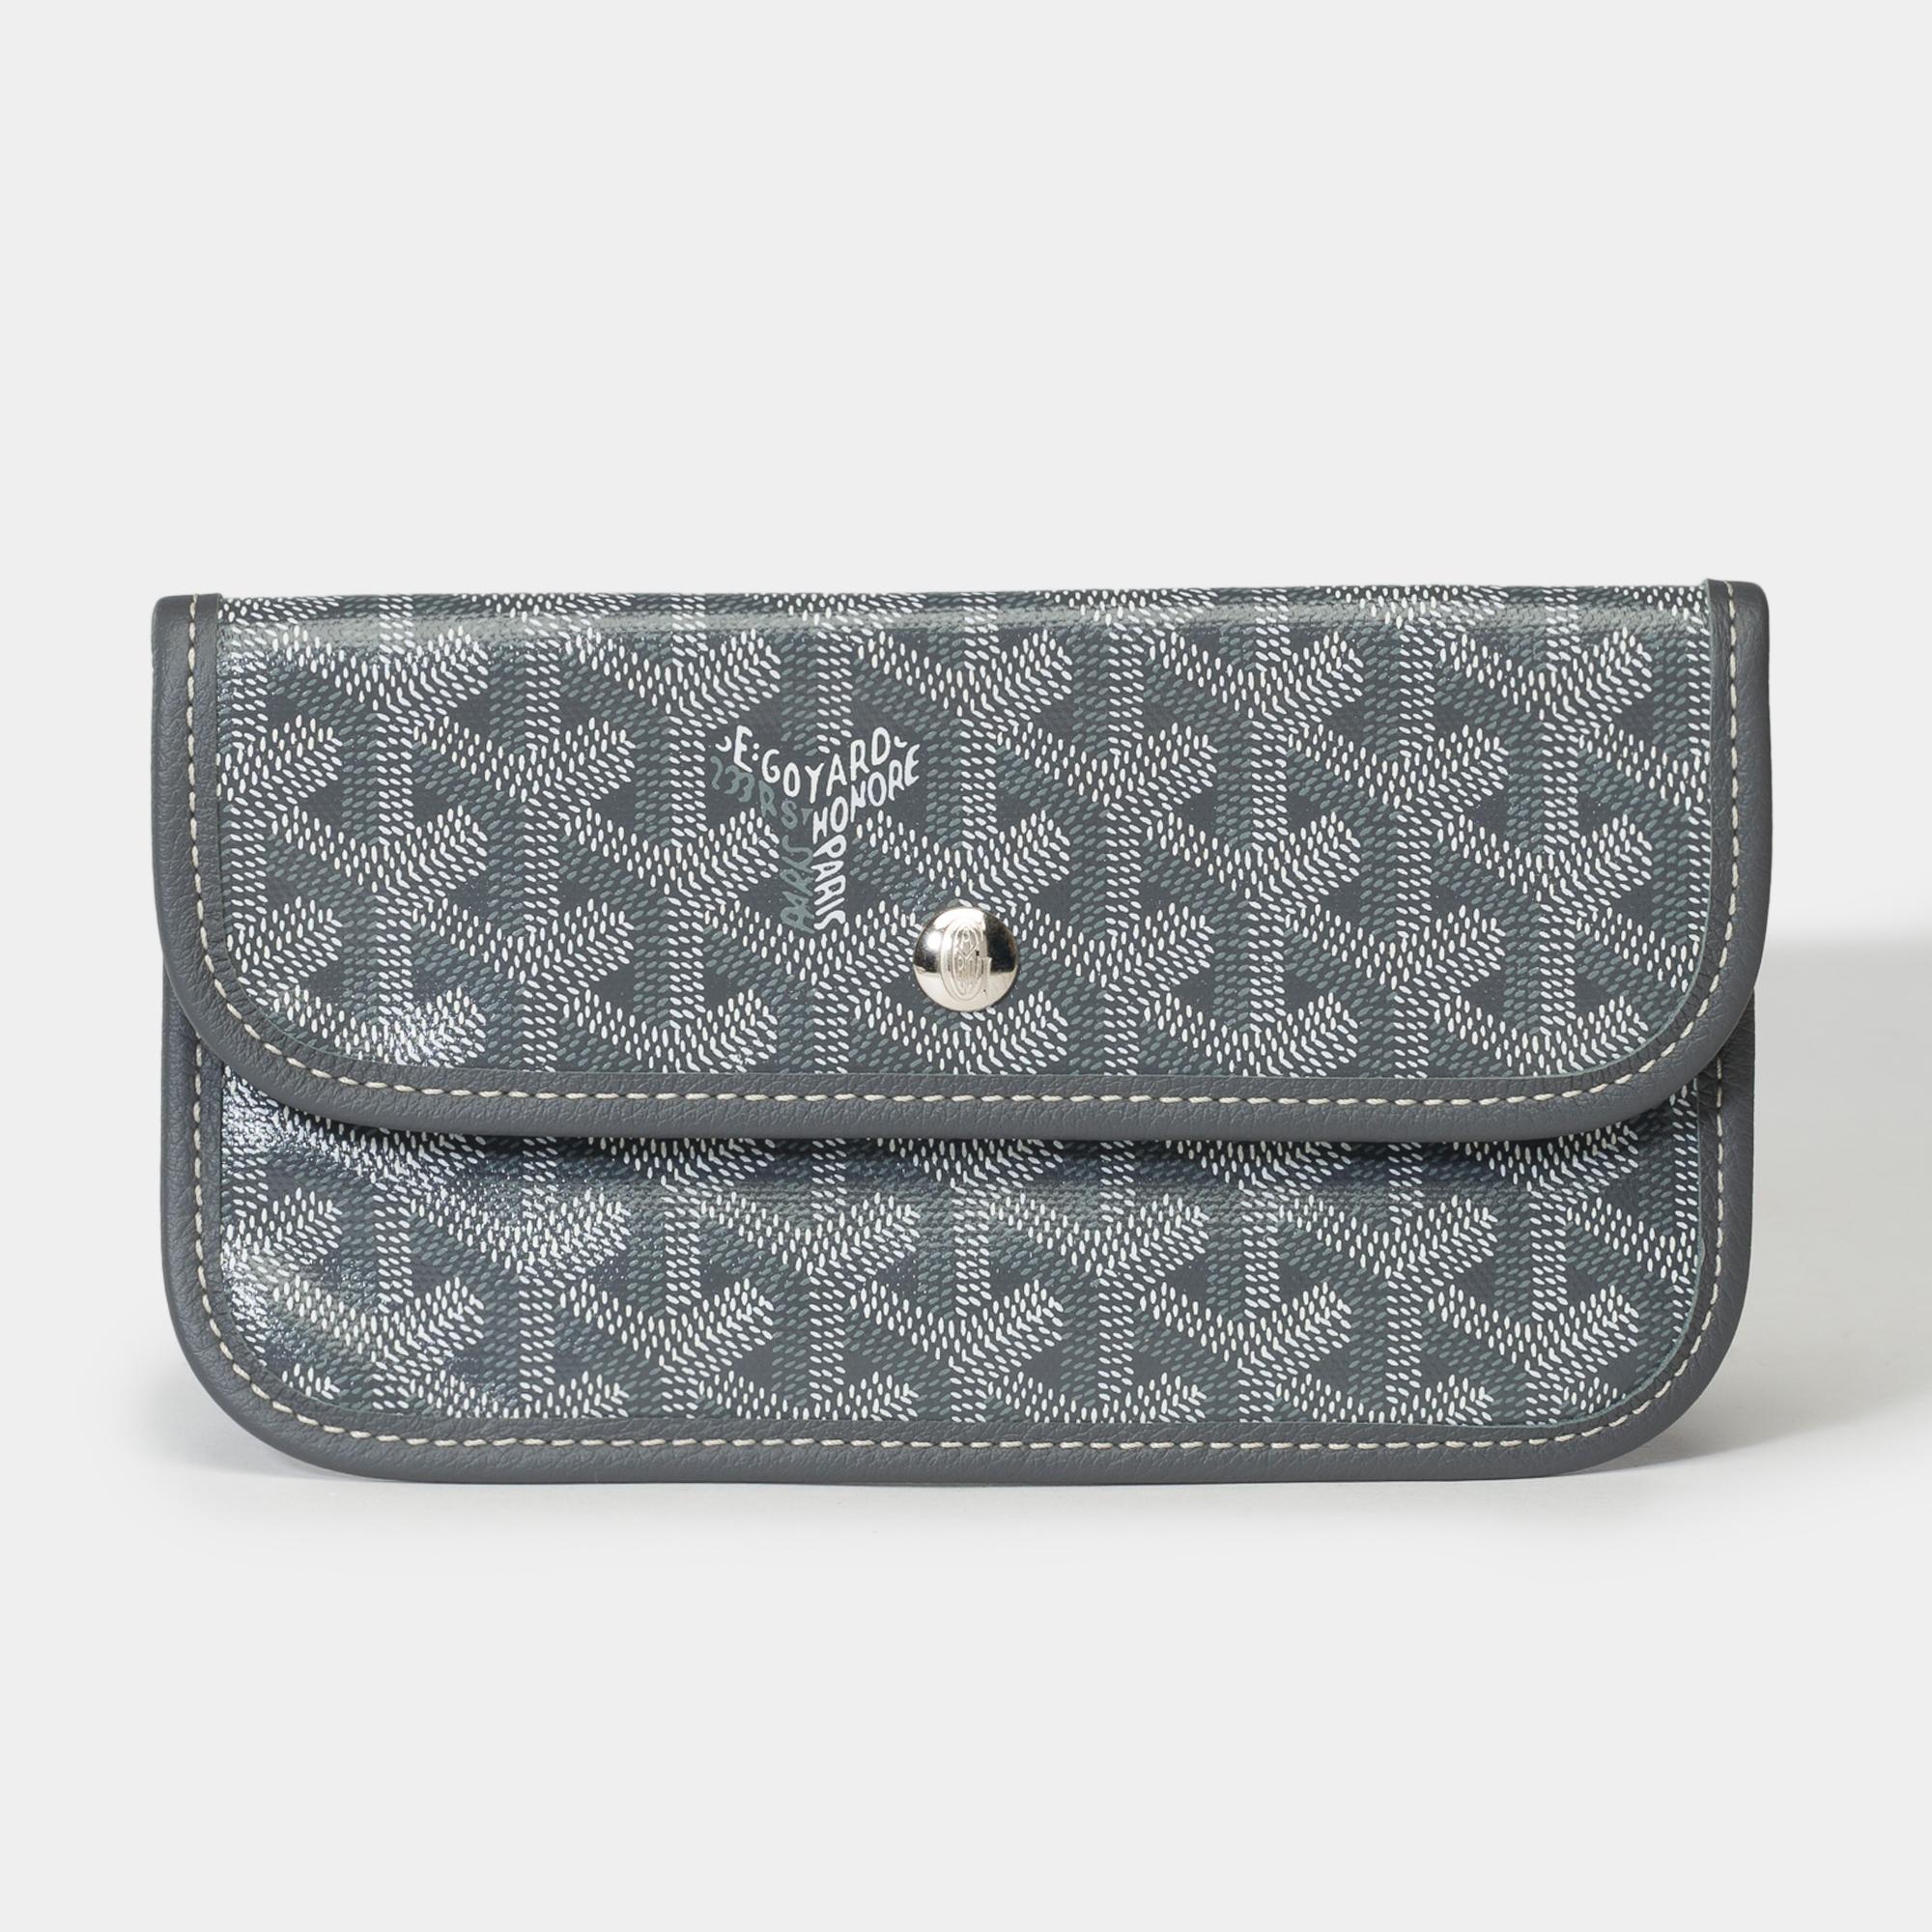 Goyard​ ​Saint-Louis​ ​Pouch​ ​in​ ​grey​ ​and​ ​white​ ​Goyardine​ ​canvas​ ​and​ ​​ ​Grey​ ​chevroches​ ​calf​ ​leather,​ ​silver​ ​metal​ ​trim​ ​for​ ​a​ ​hand​ ​or​ ​accessory

Inner​ ​lining​ ​in​ ​white​ ​canvas
Signature:​ ​